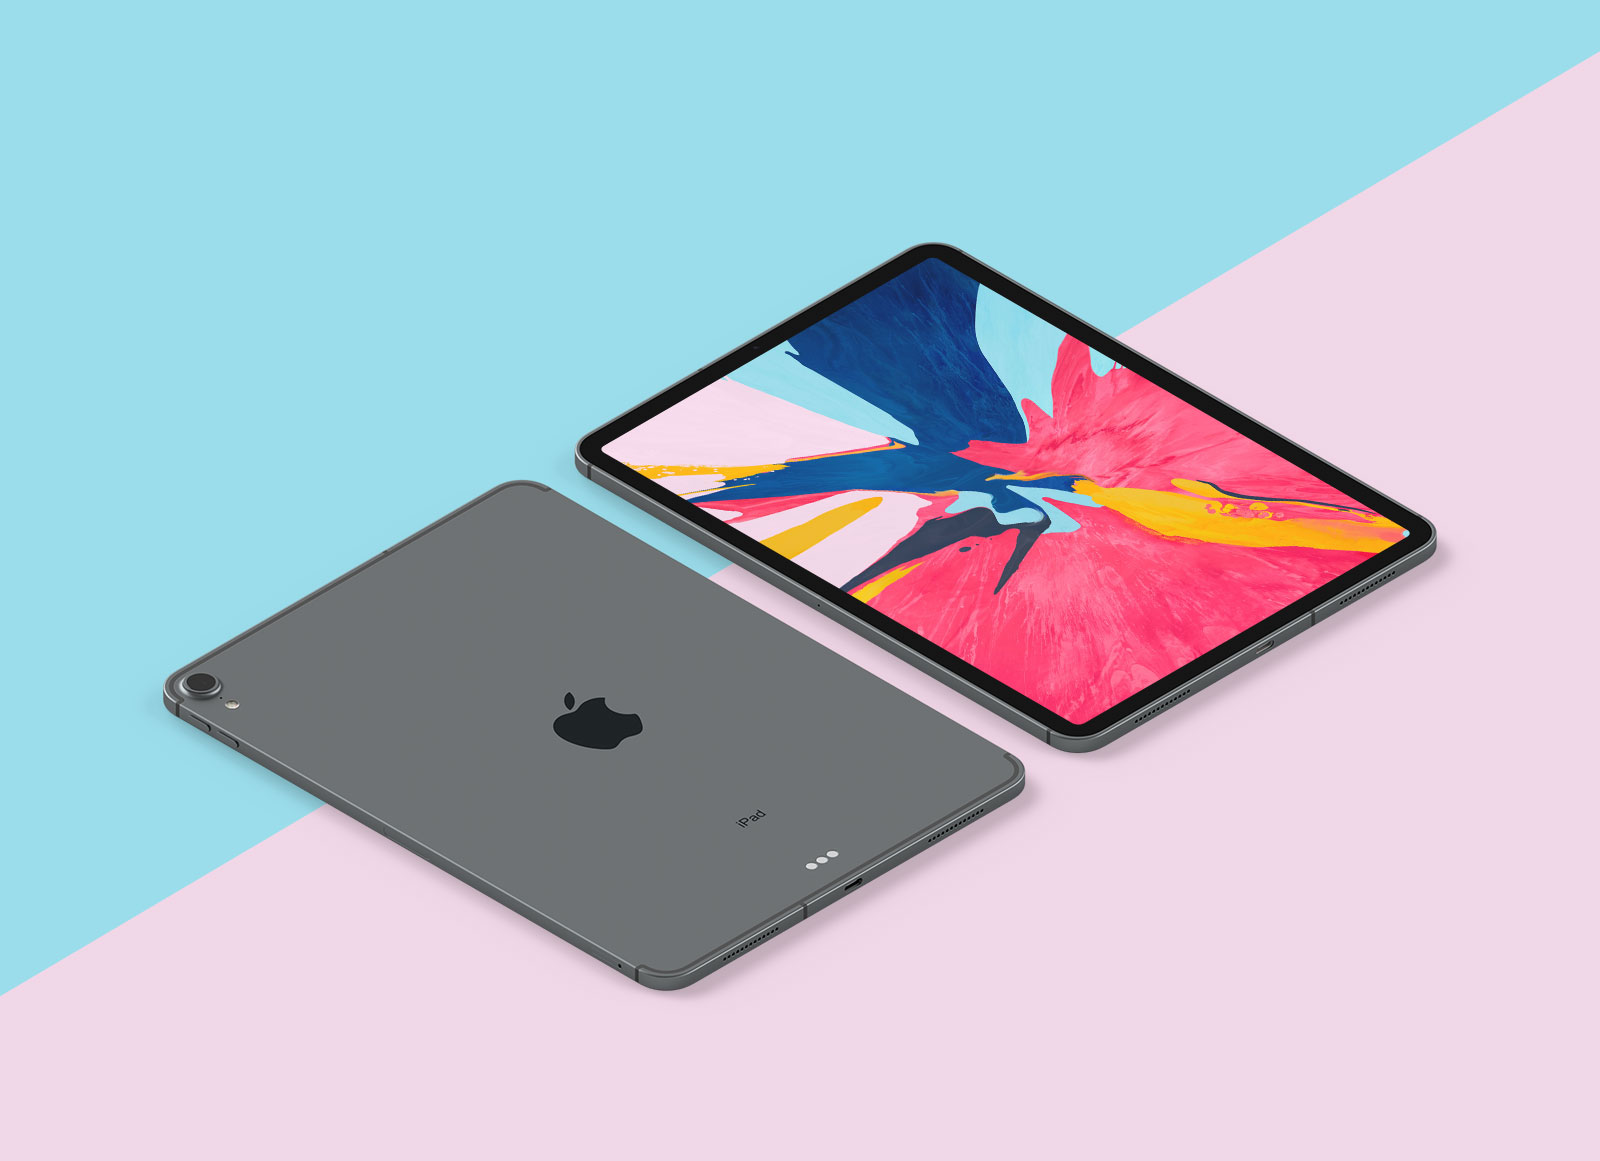 Download Free New iPad Pro 2018 Mockup PSD in Perspective View ...